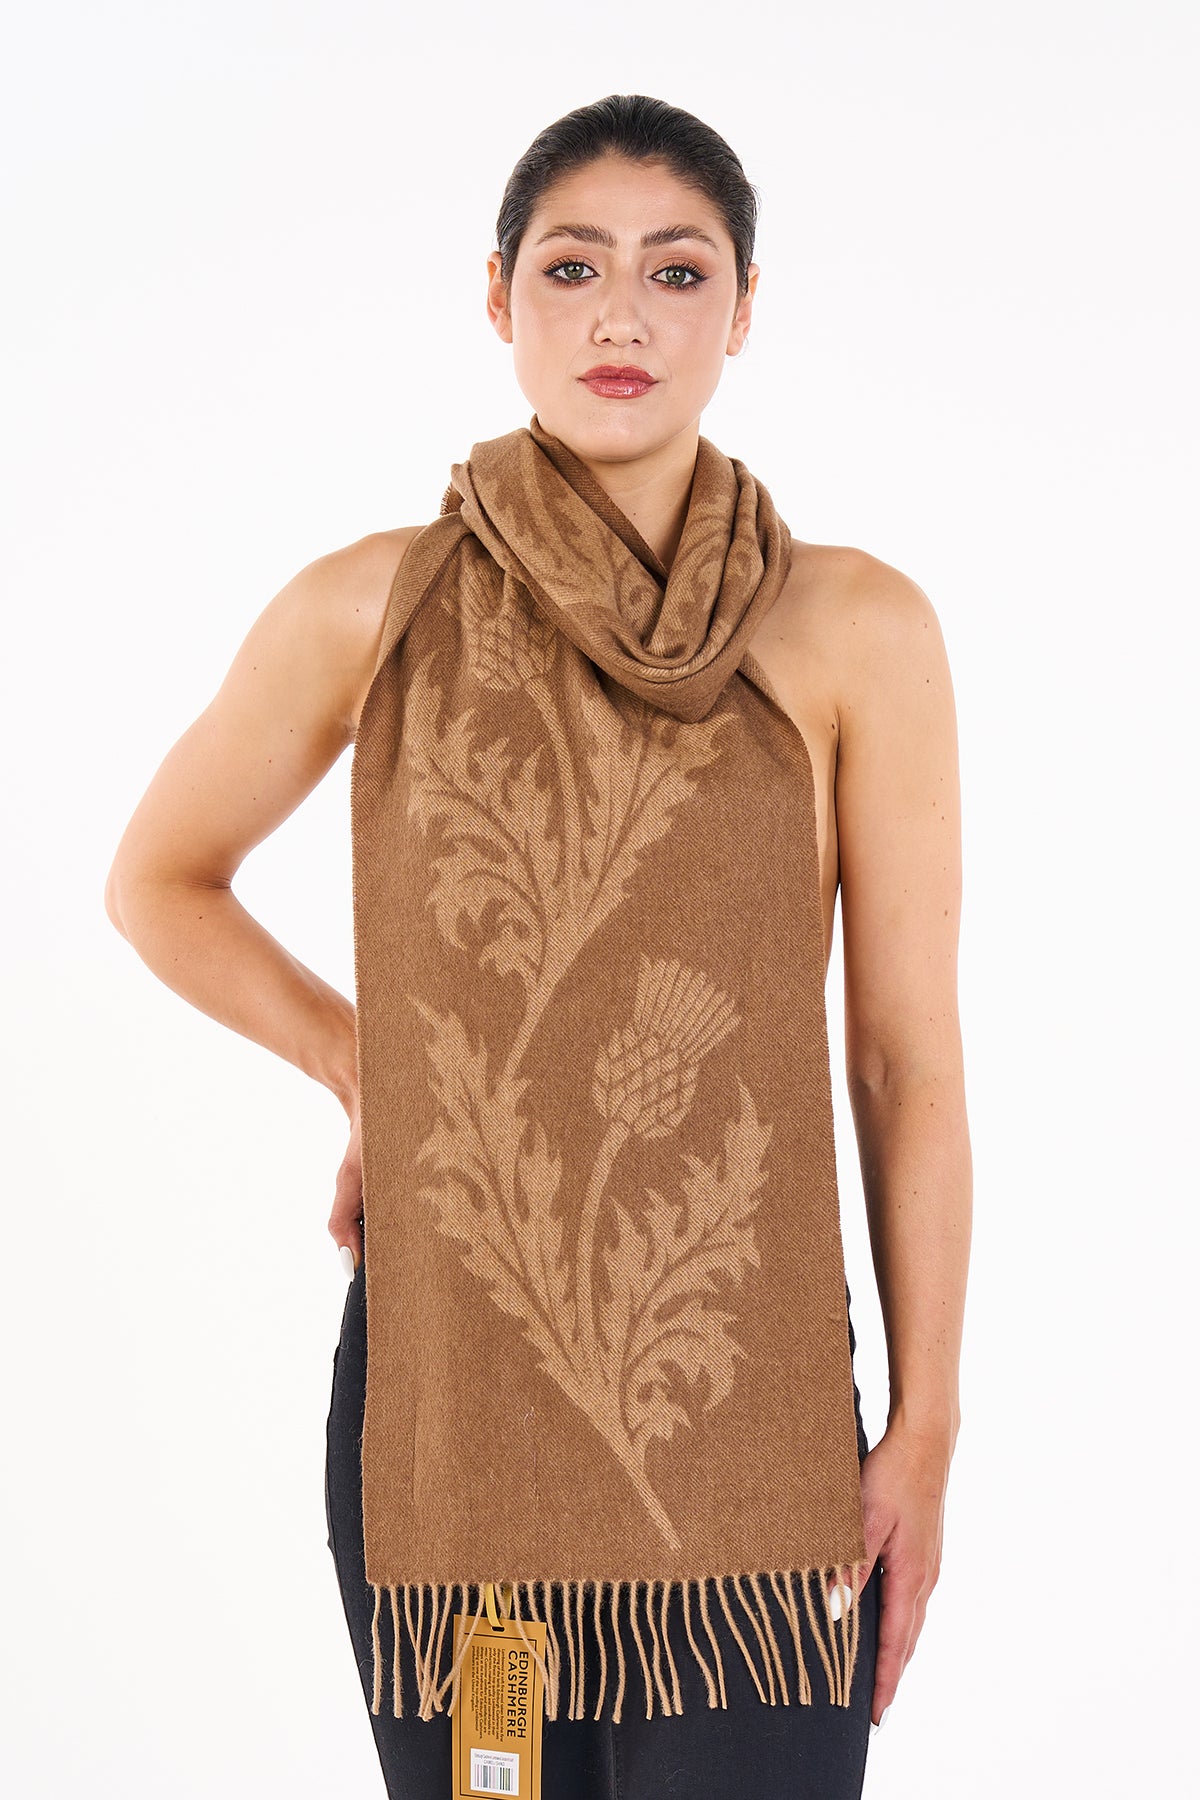 Scarf Single Thistle Camel 100% Pure Lambswool